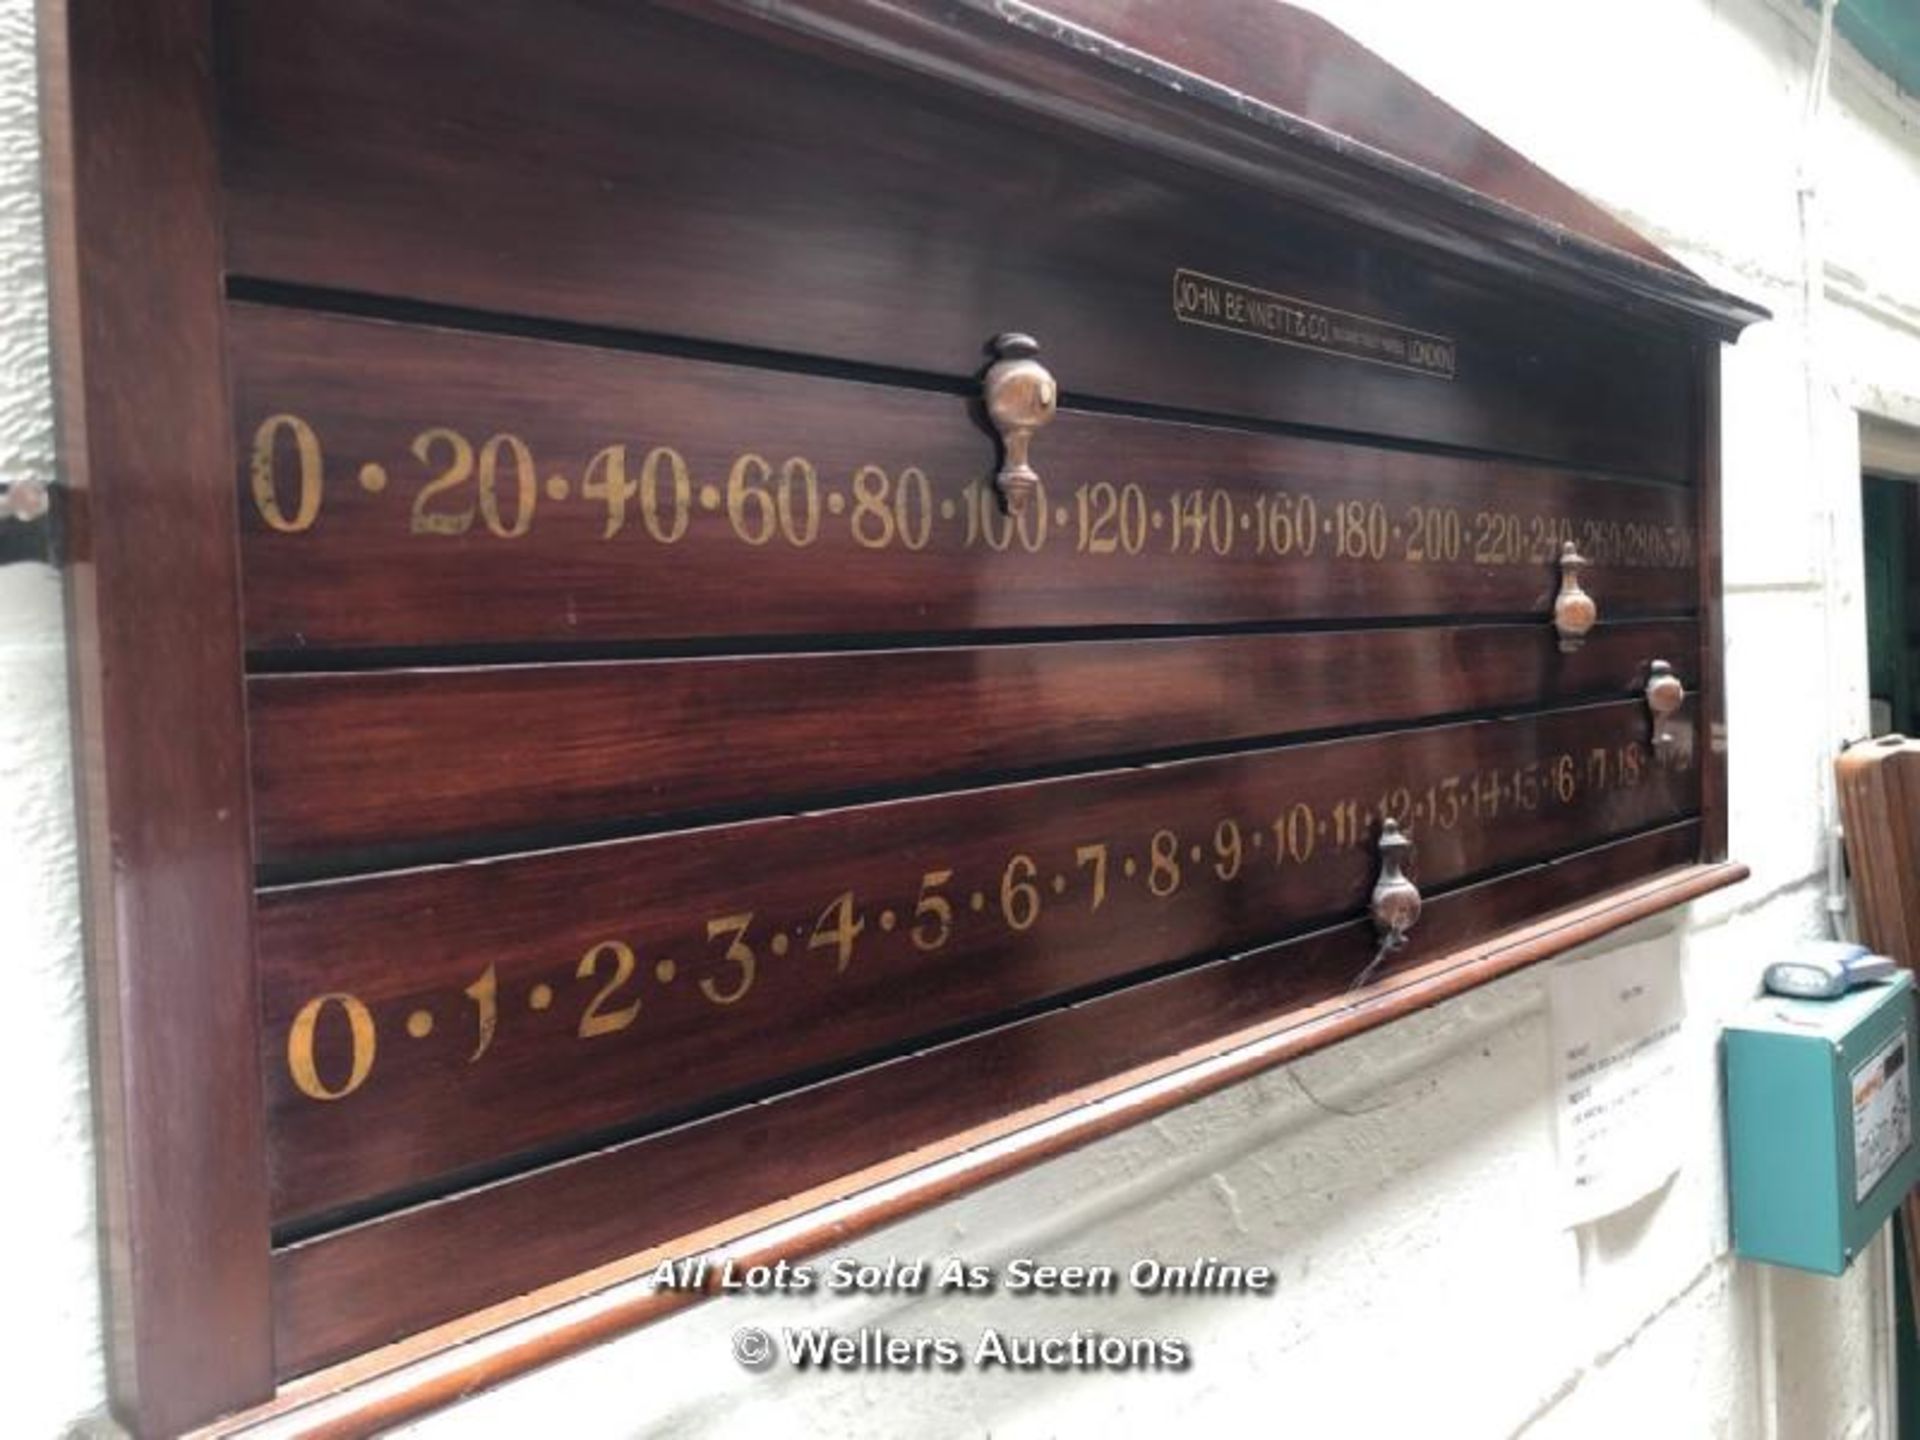 JOHN BENNETT & CO. LONDON BILLIARD SCOREBOARD WITH GOLD LEAF NUMBERS AND WOODEN SLIDERS WITH - Image 3 of 3